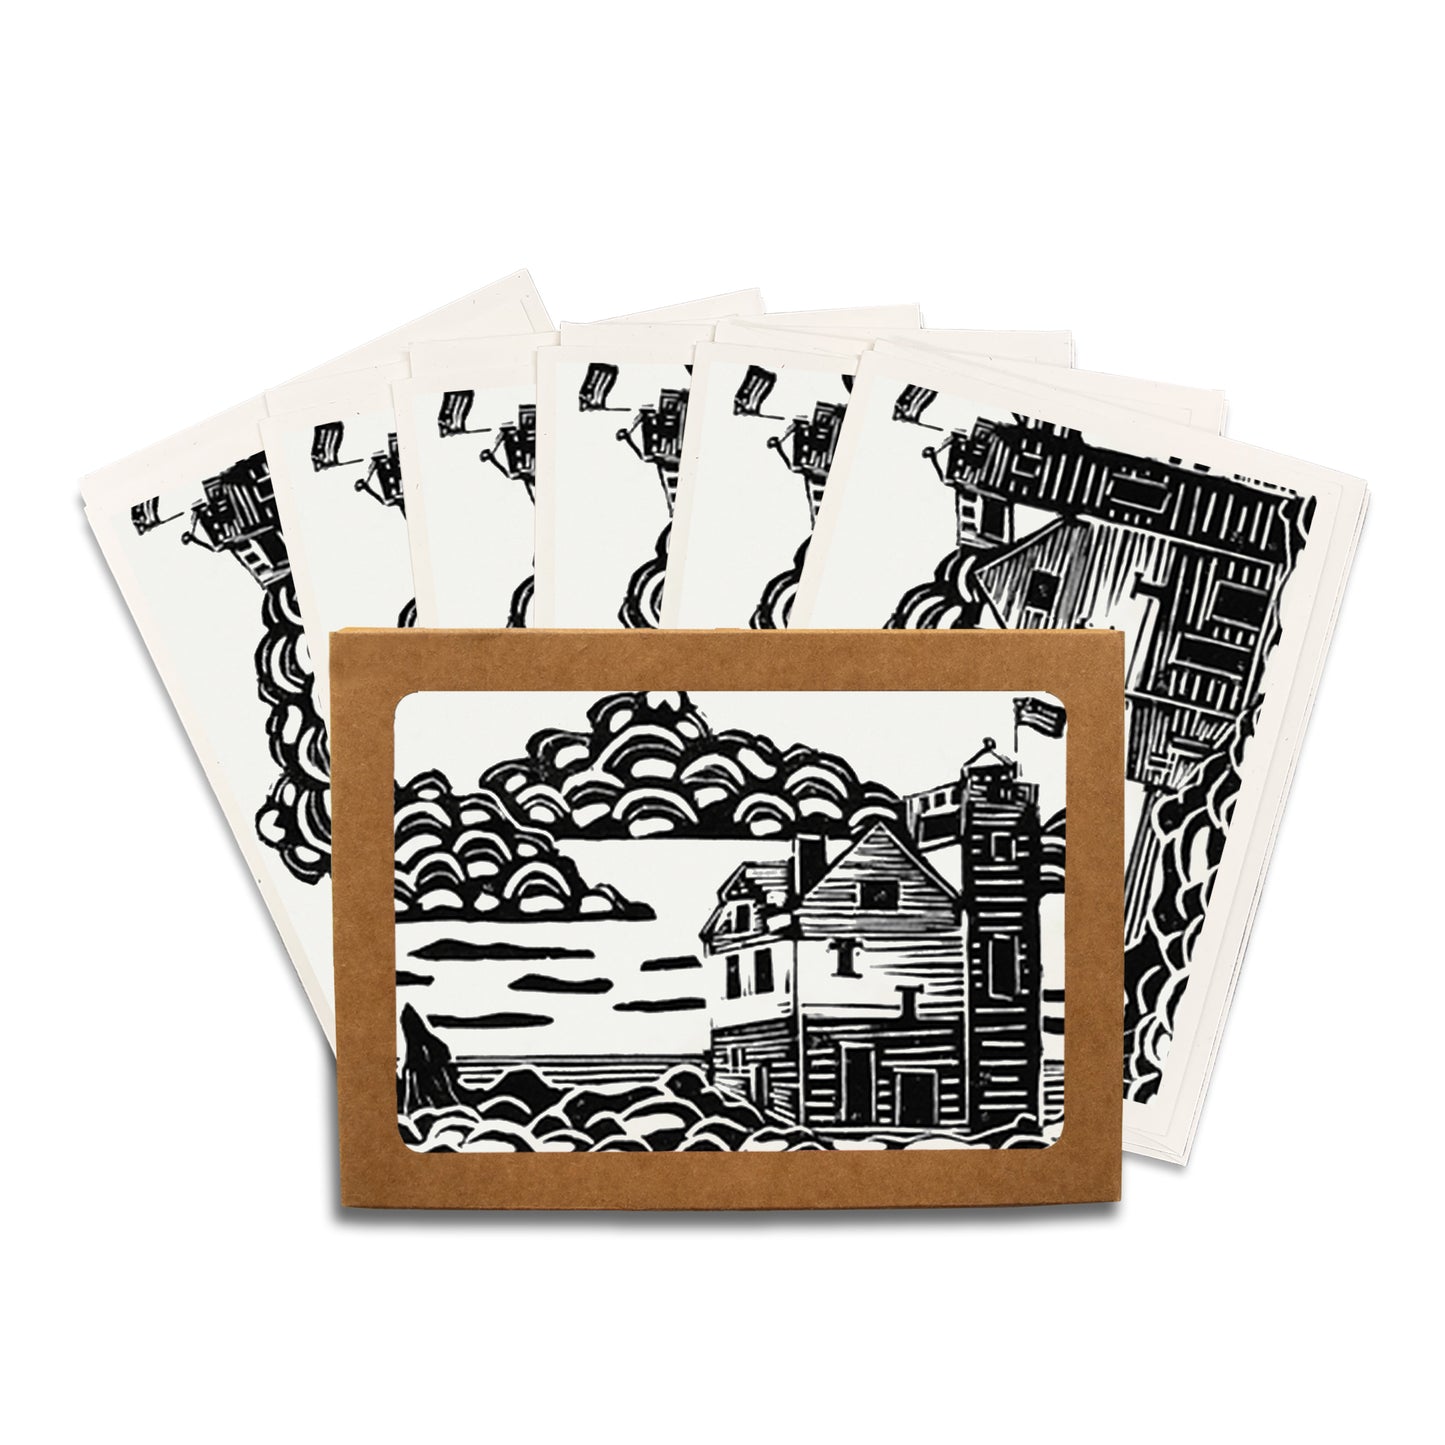 Round Island Lighthouse.  A casually elegant set of cards featuring a digital reproduction of a block print design with the same title by Natalia Wohletz of Peninsula Prints, Milford and Mackinac Island, Michigan.